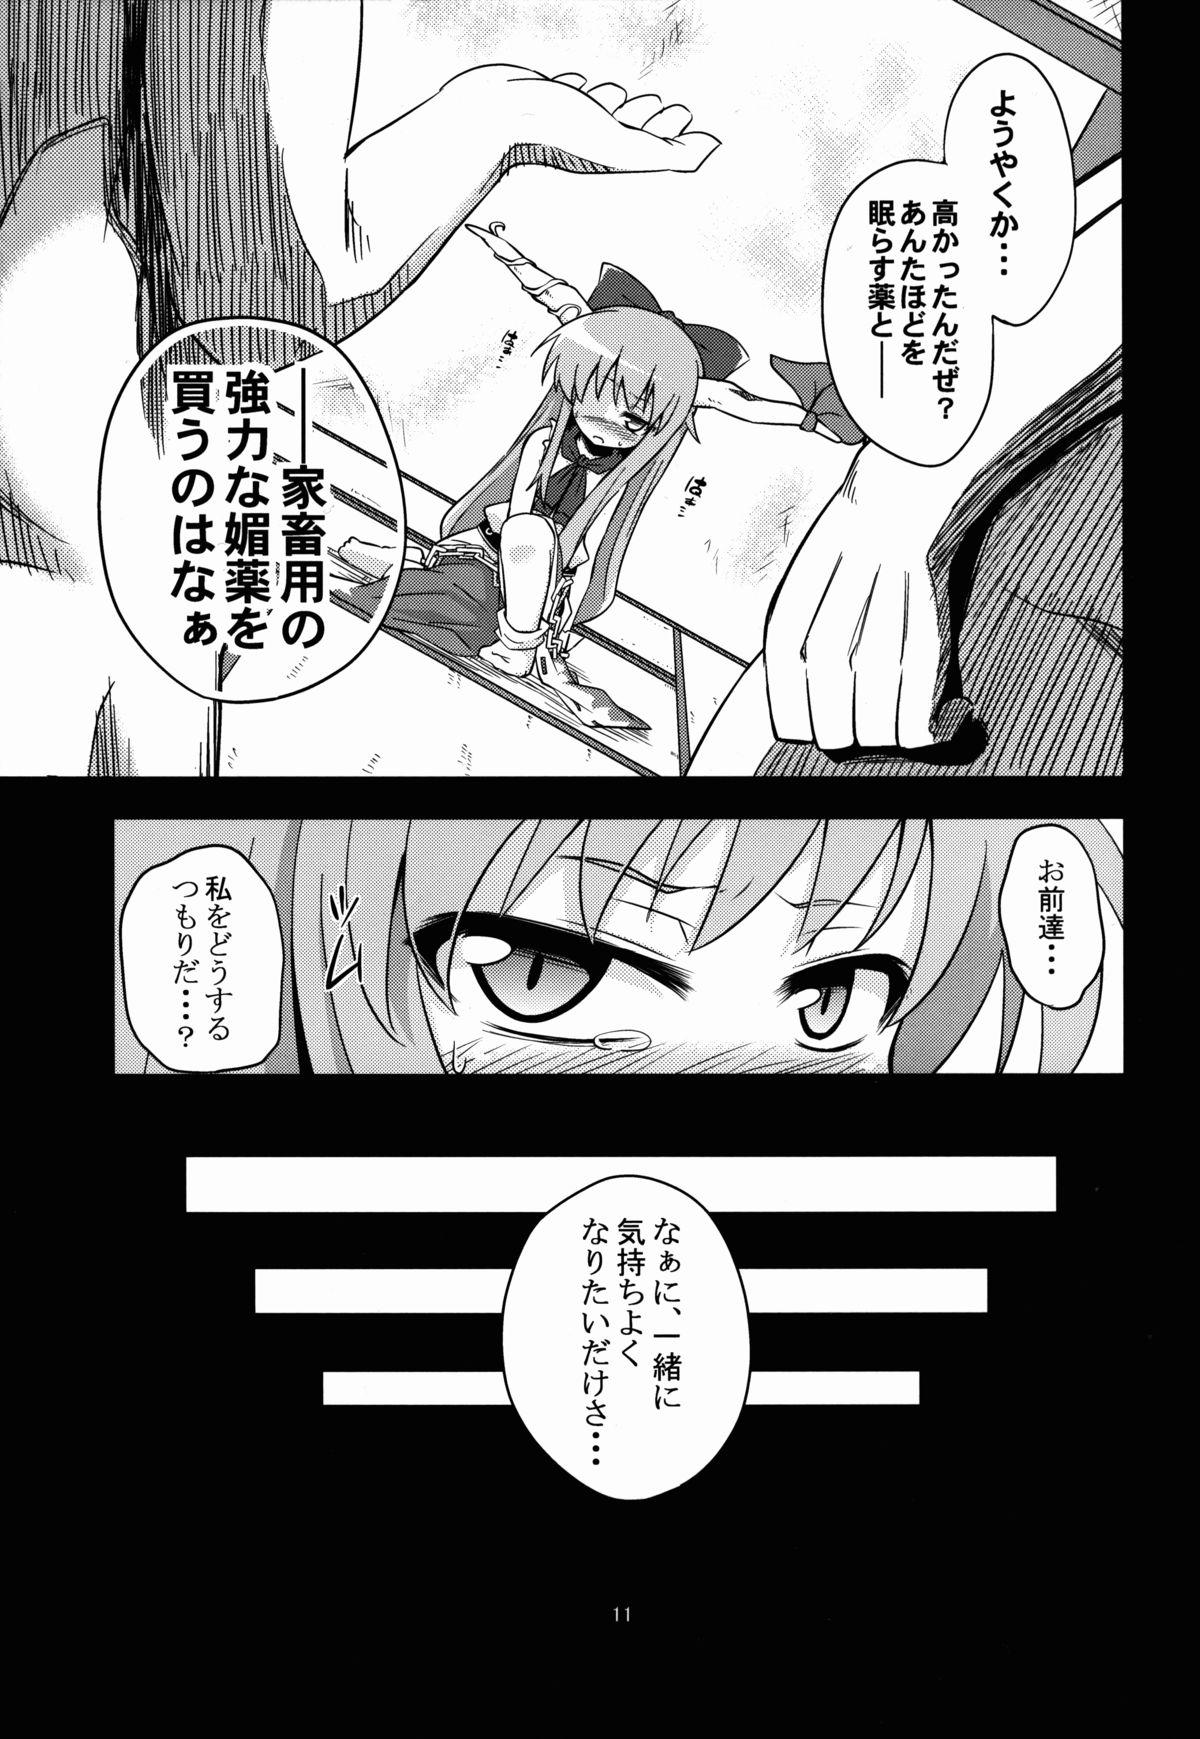 Play 鬼犯嘘犯喜 - Touhou project Free Hard Core Porn - Page 11